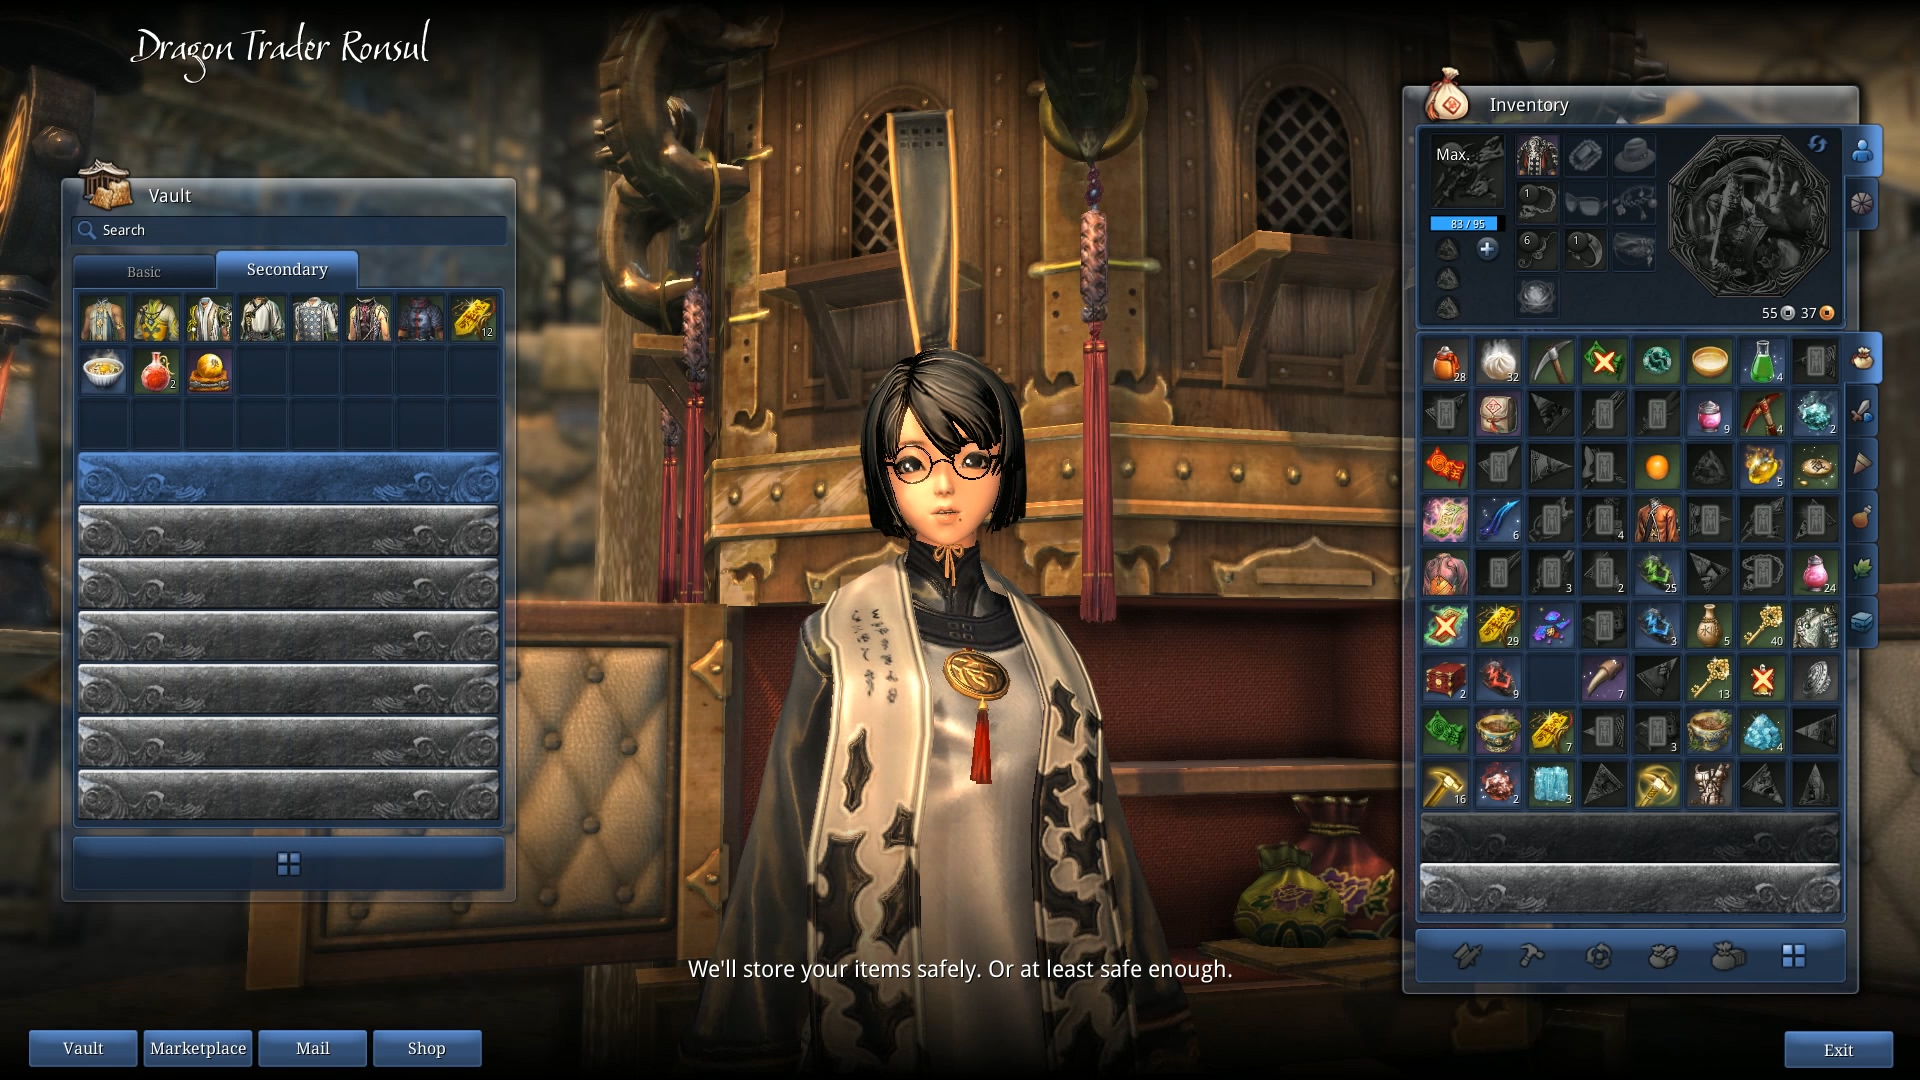 We Had A Good Run Blade & Soul, But I’m Out